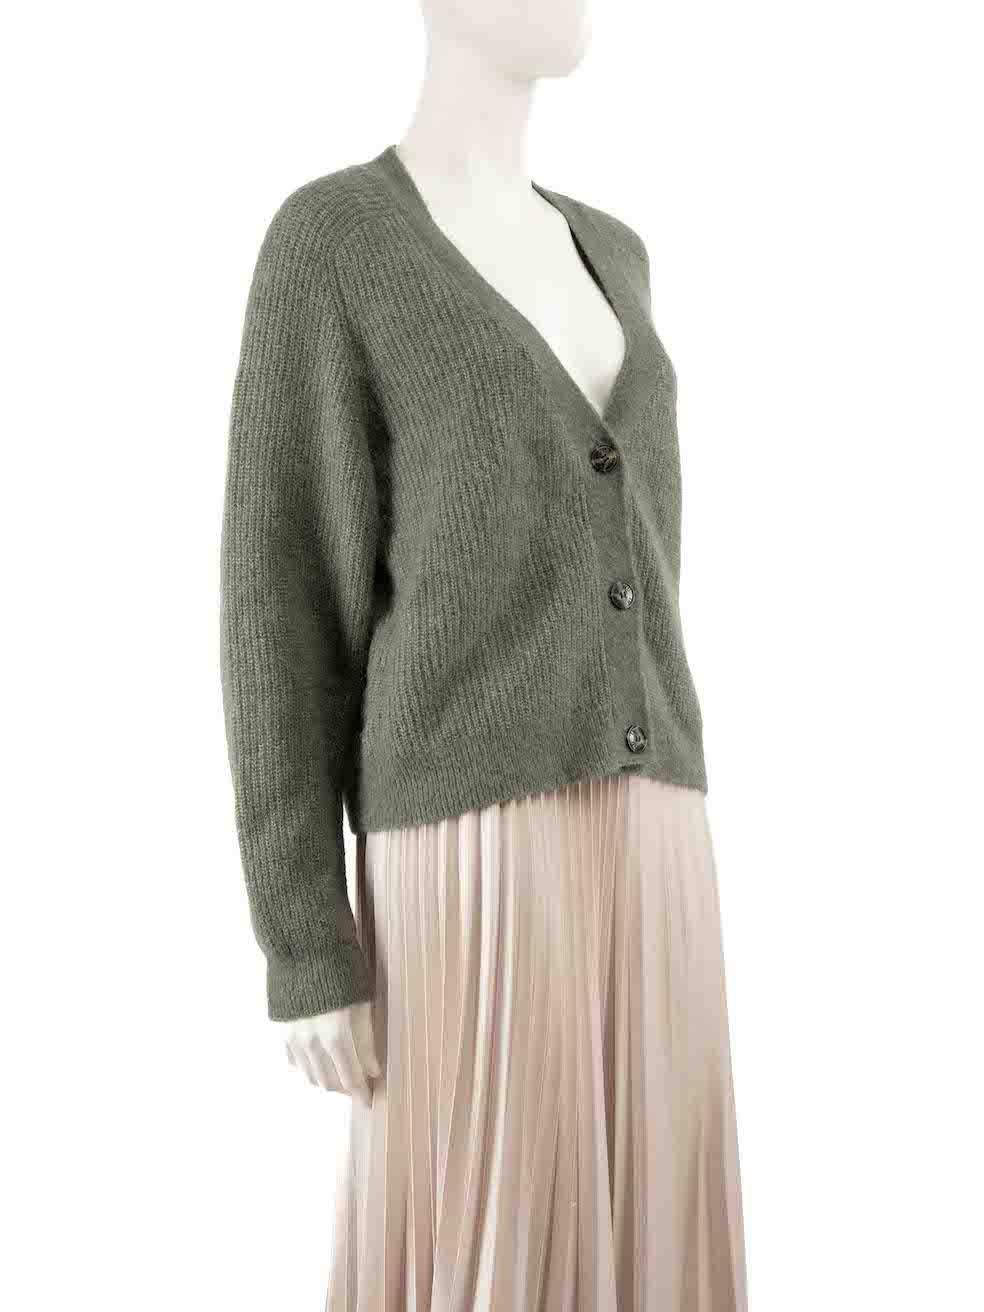 CONDITION is Never worn. No visible wear to cardigan is evident on this new Ganni designer resale item.
 
 
 
 Details
 
 
 Green
 
 Wool
 
 Knit cardigan
 
 Long sleeves
 
 V-neck
 
 Button up fastening
 
 
 
 Made in China
 
 Composition
 
 Wool